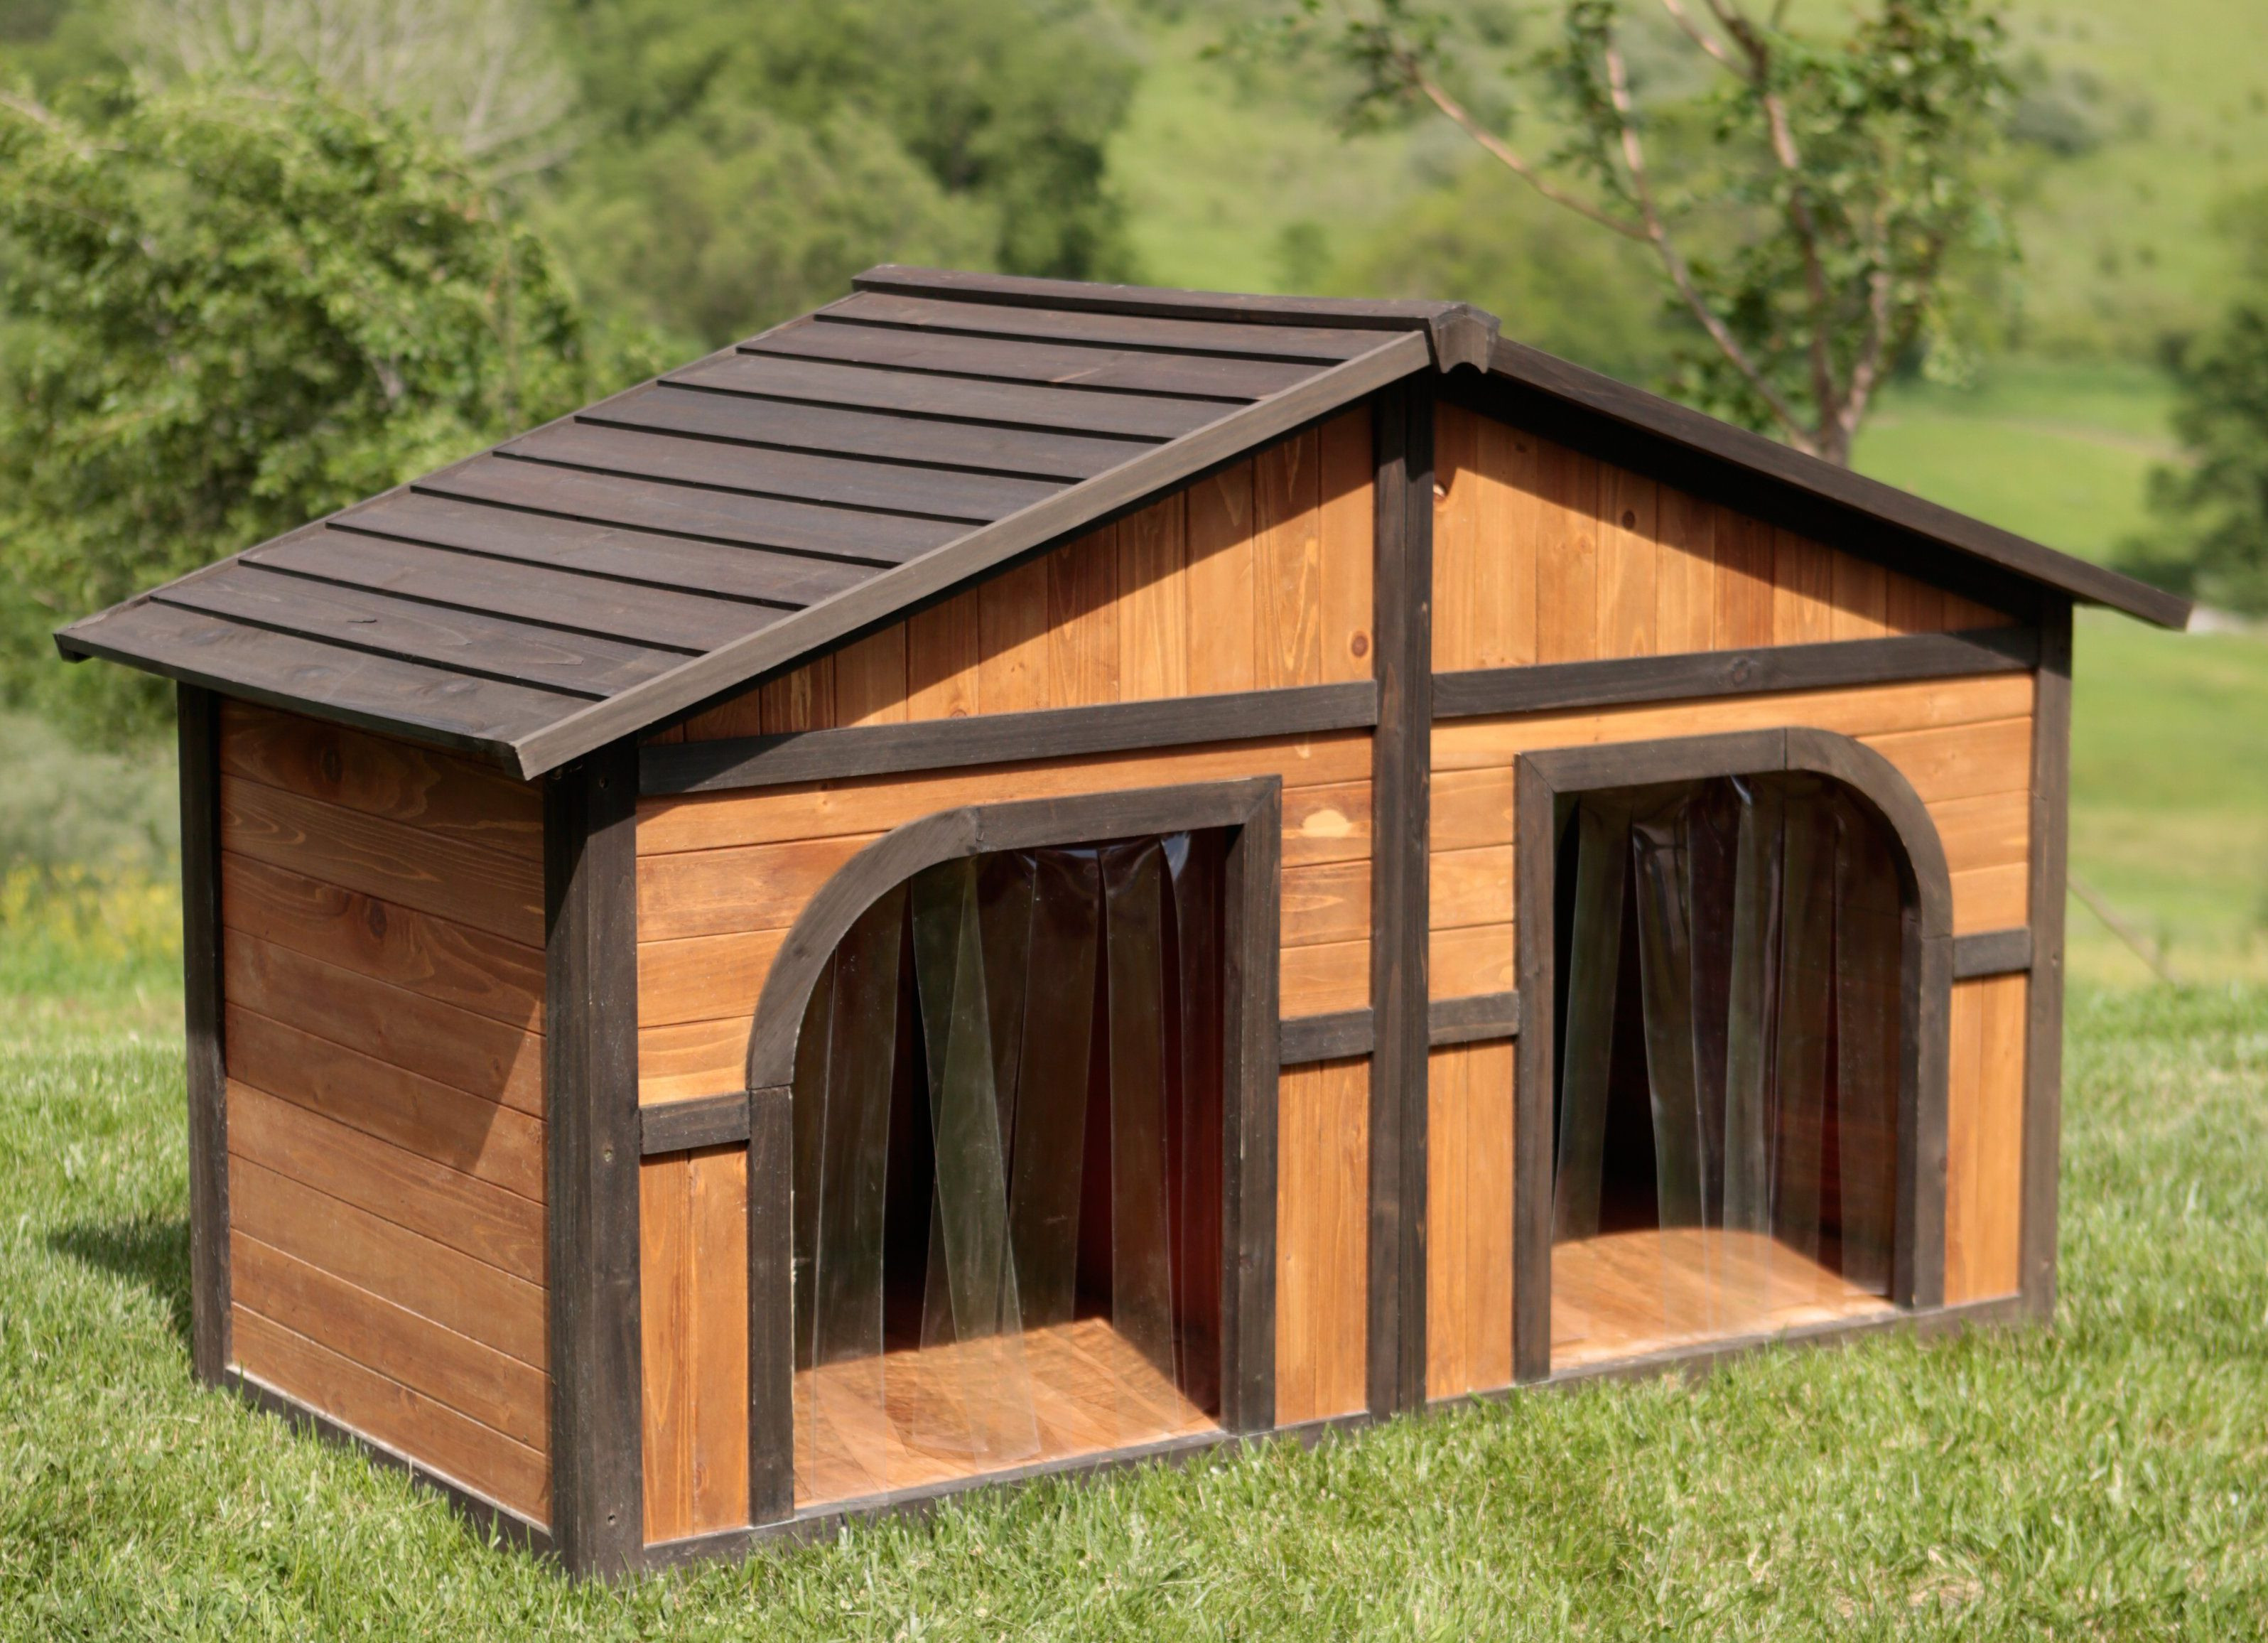 DIY Dog House Kits
 10 Simple But Beautiful DIY Dog House Designs That You Can